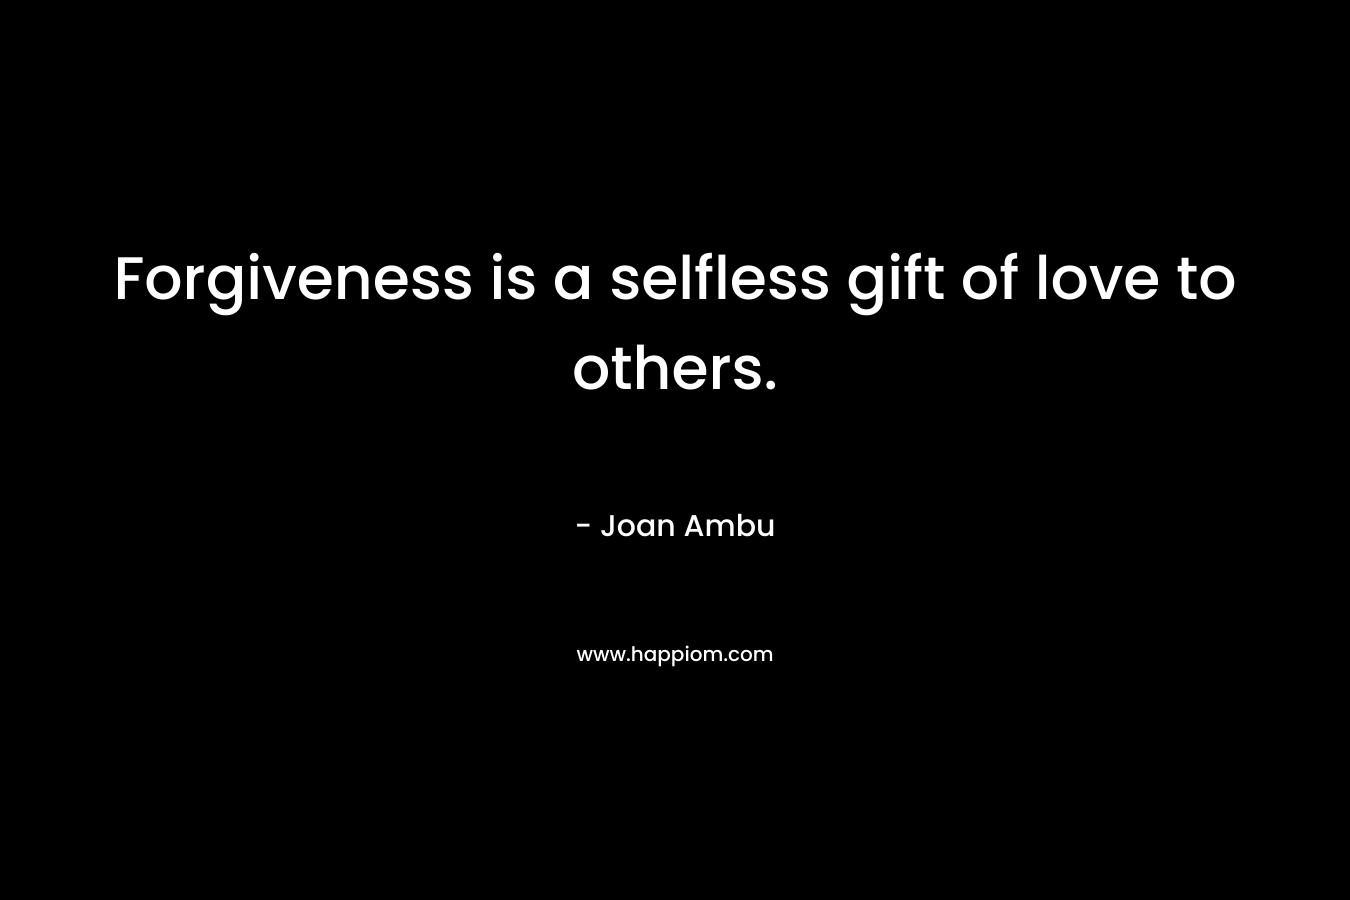 Forgiveness is a selfless gift of love to others.